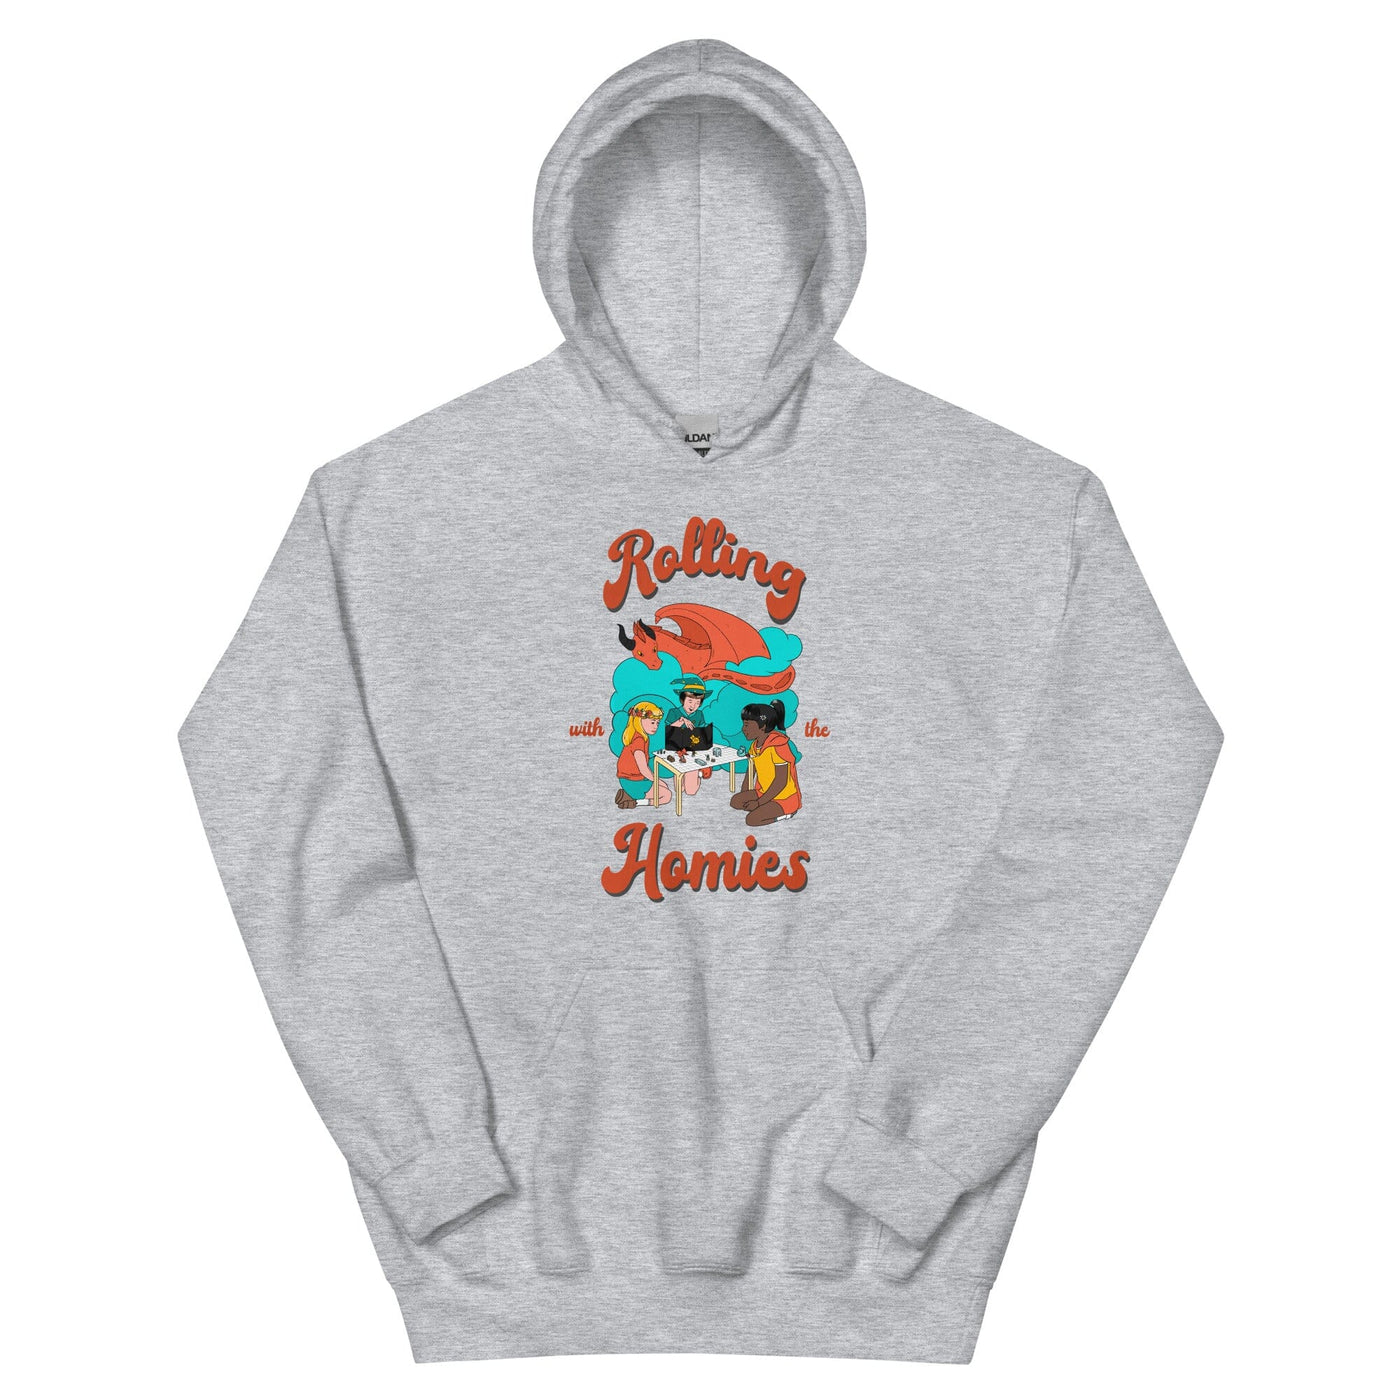 Rolling with the Homies | Unisex Hoodie | Retro Gaming Threads & Thistles Inventory Sport Grey S 